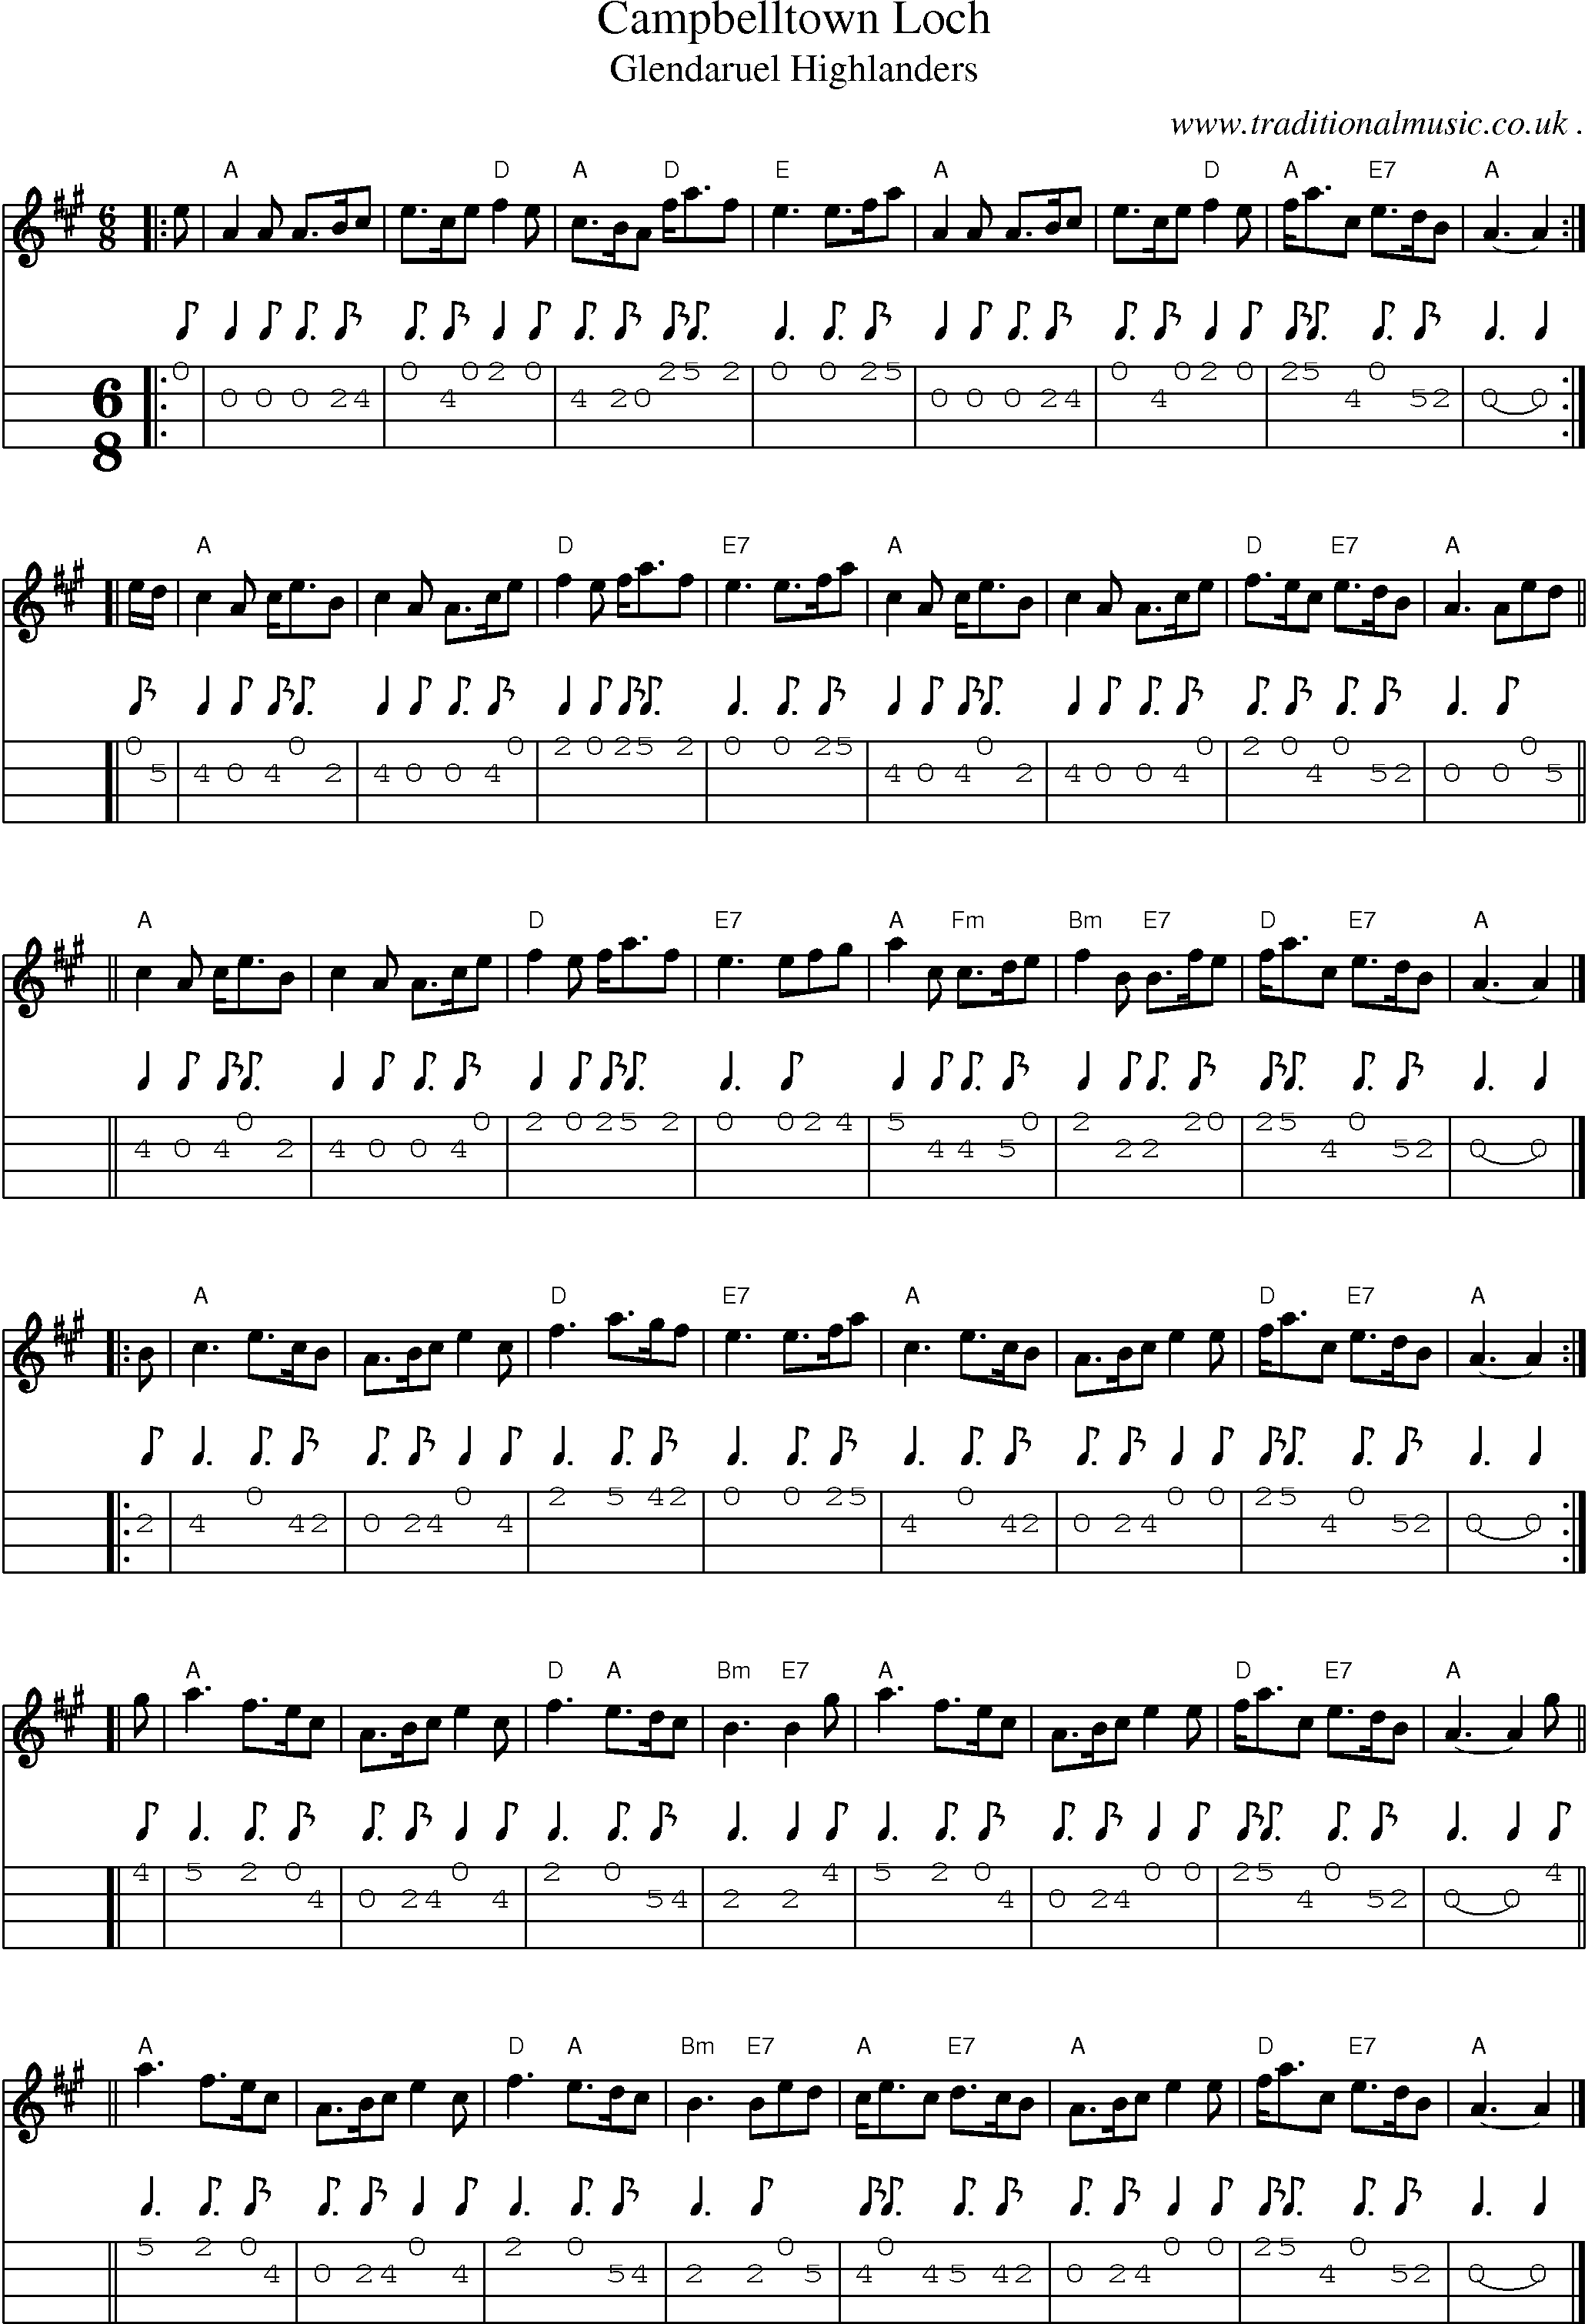 Sheet-music  score, Chords and Mandolin Tabs for Campbelltown Loch